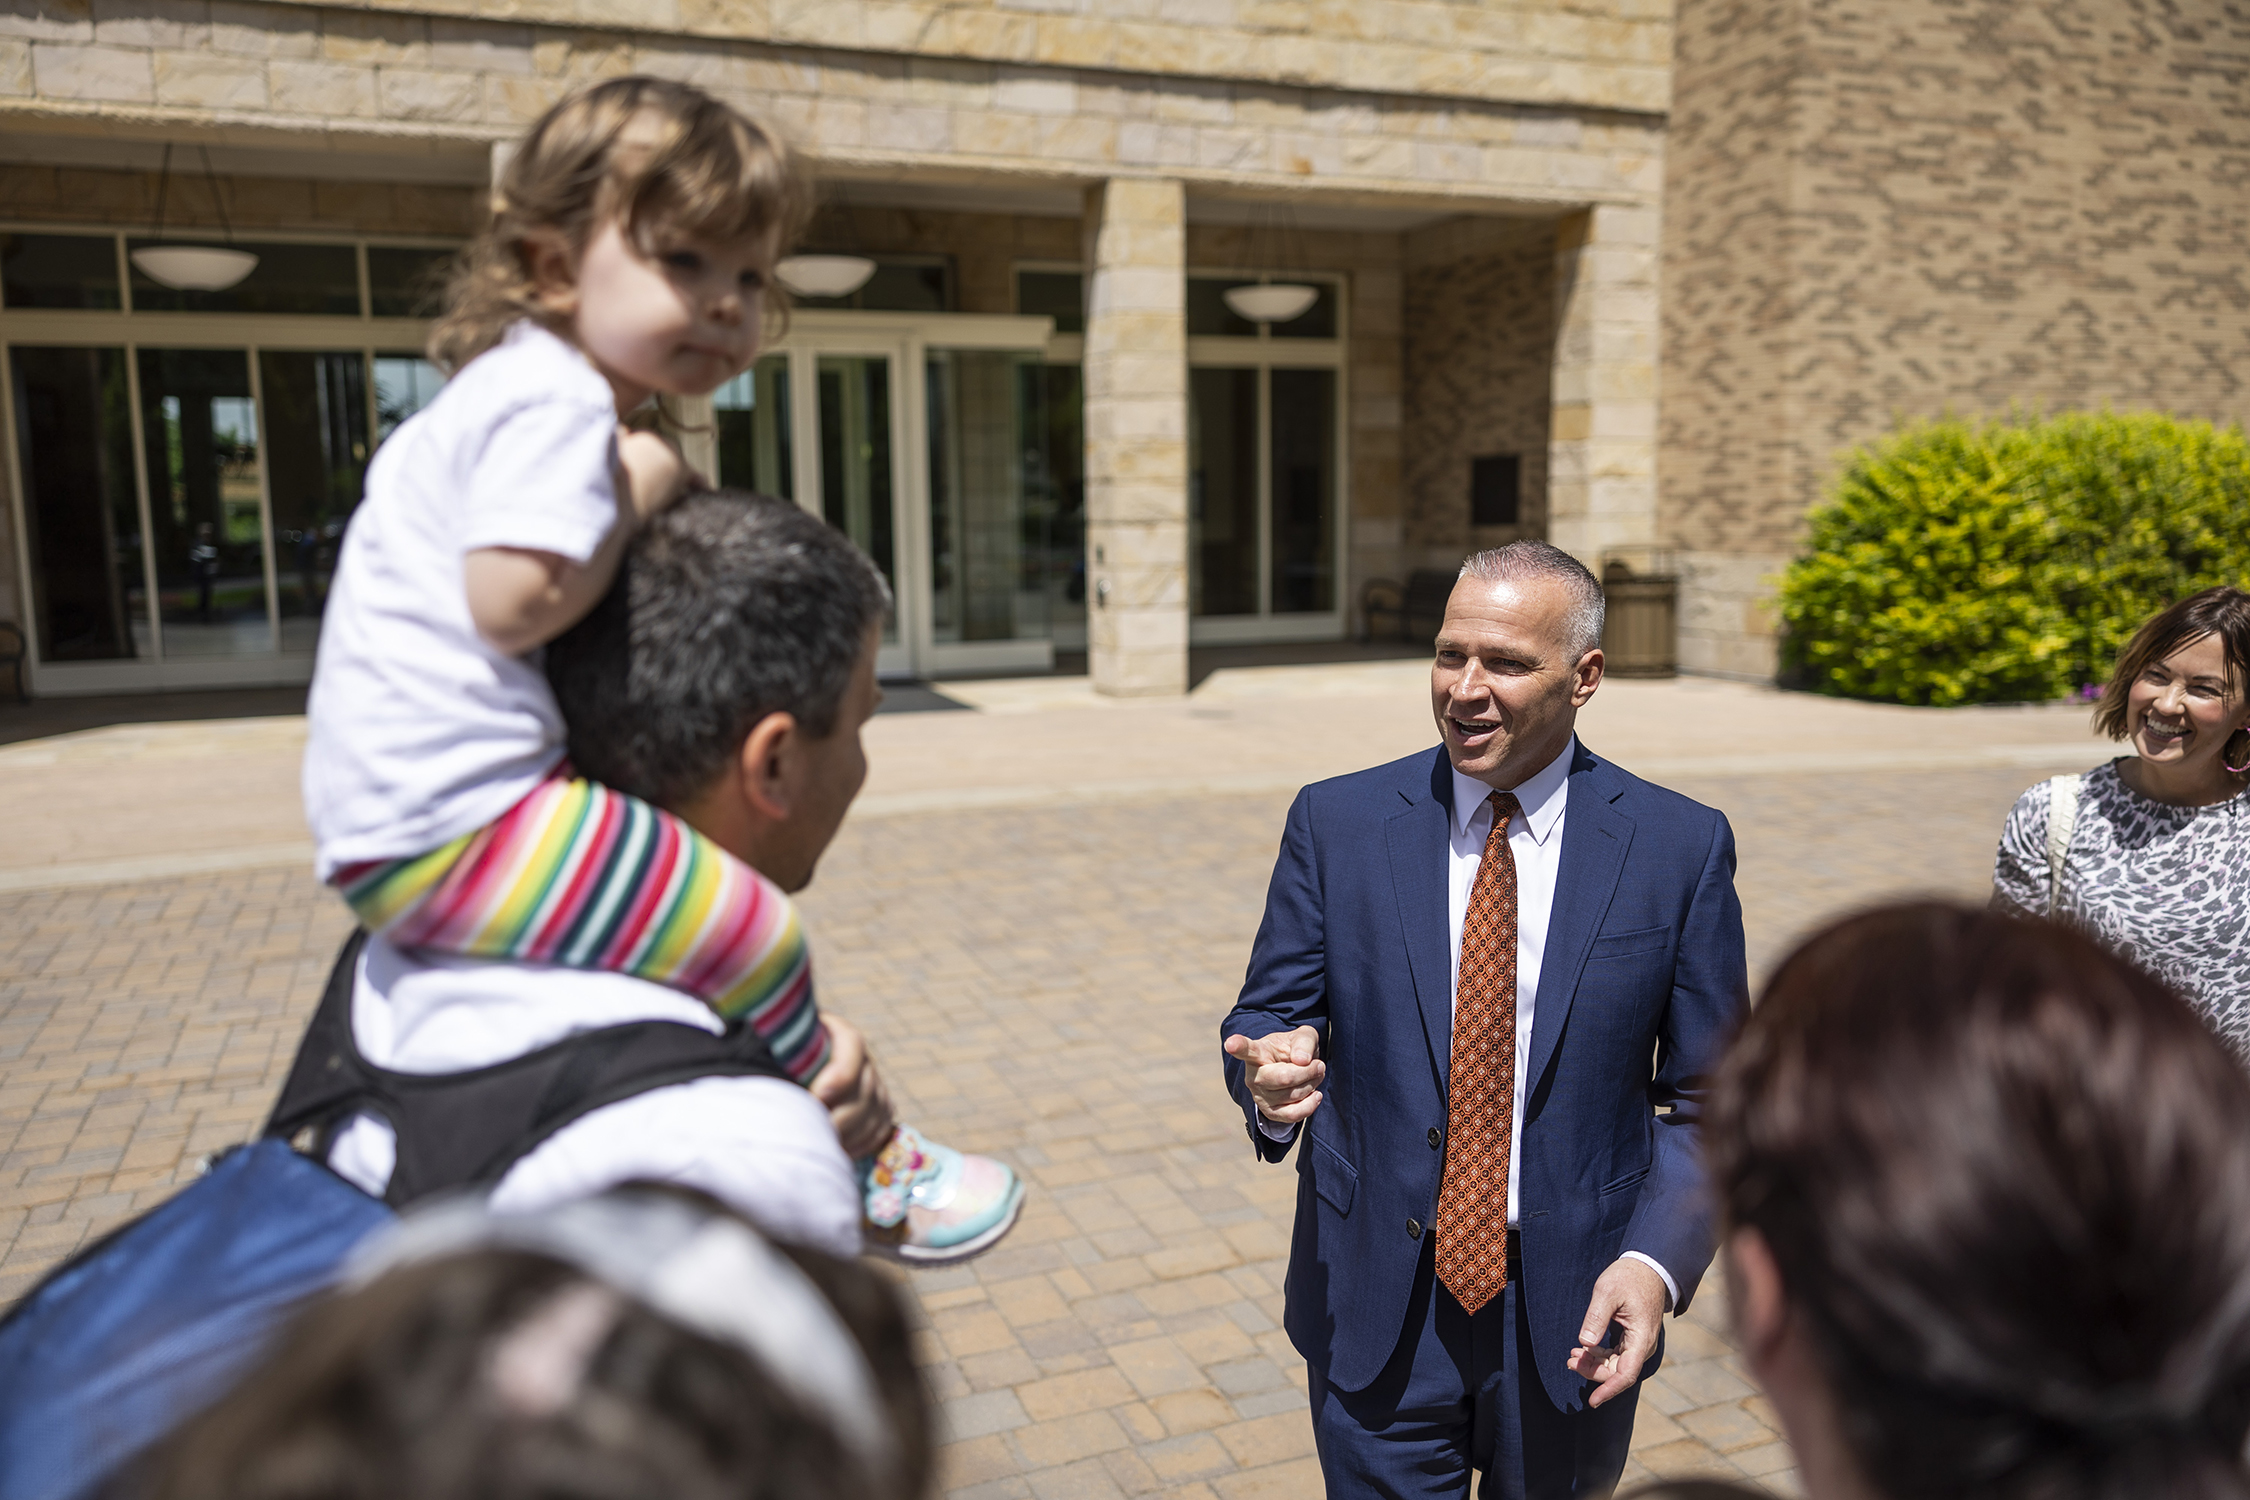 Brigham Young University President Reese, interacting with the BYU community